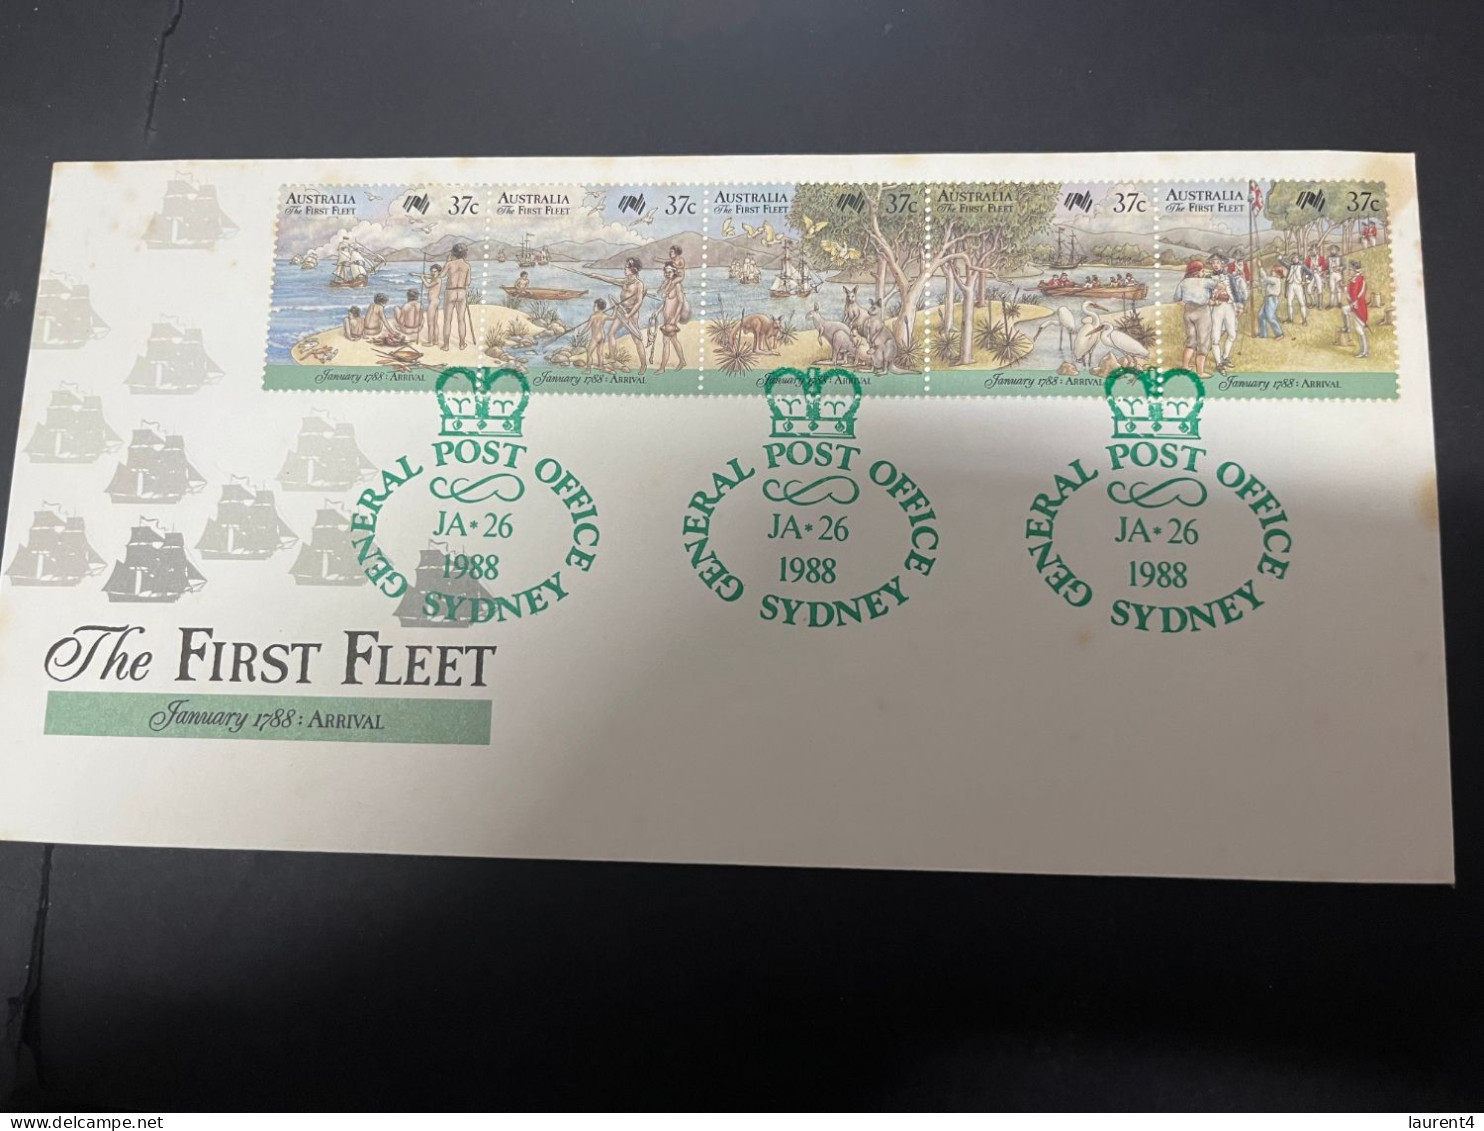 4-5-2024 (4 Z 9)  Australia FDC (2 Covers) The First Fleet (as Seen On Scans) - Primo Giorno D'emissione (FDC)